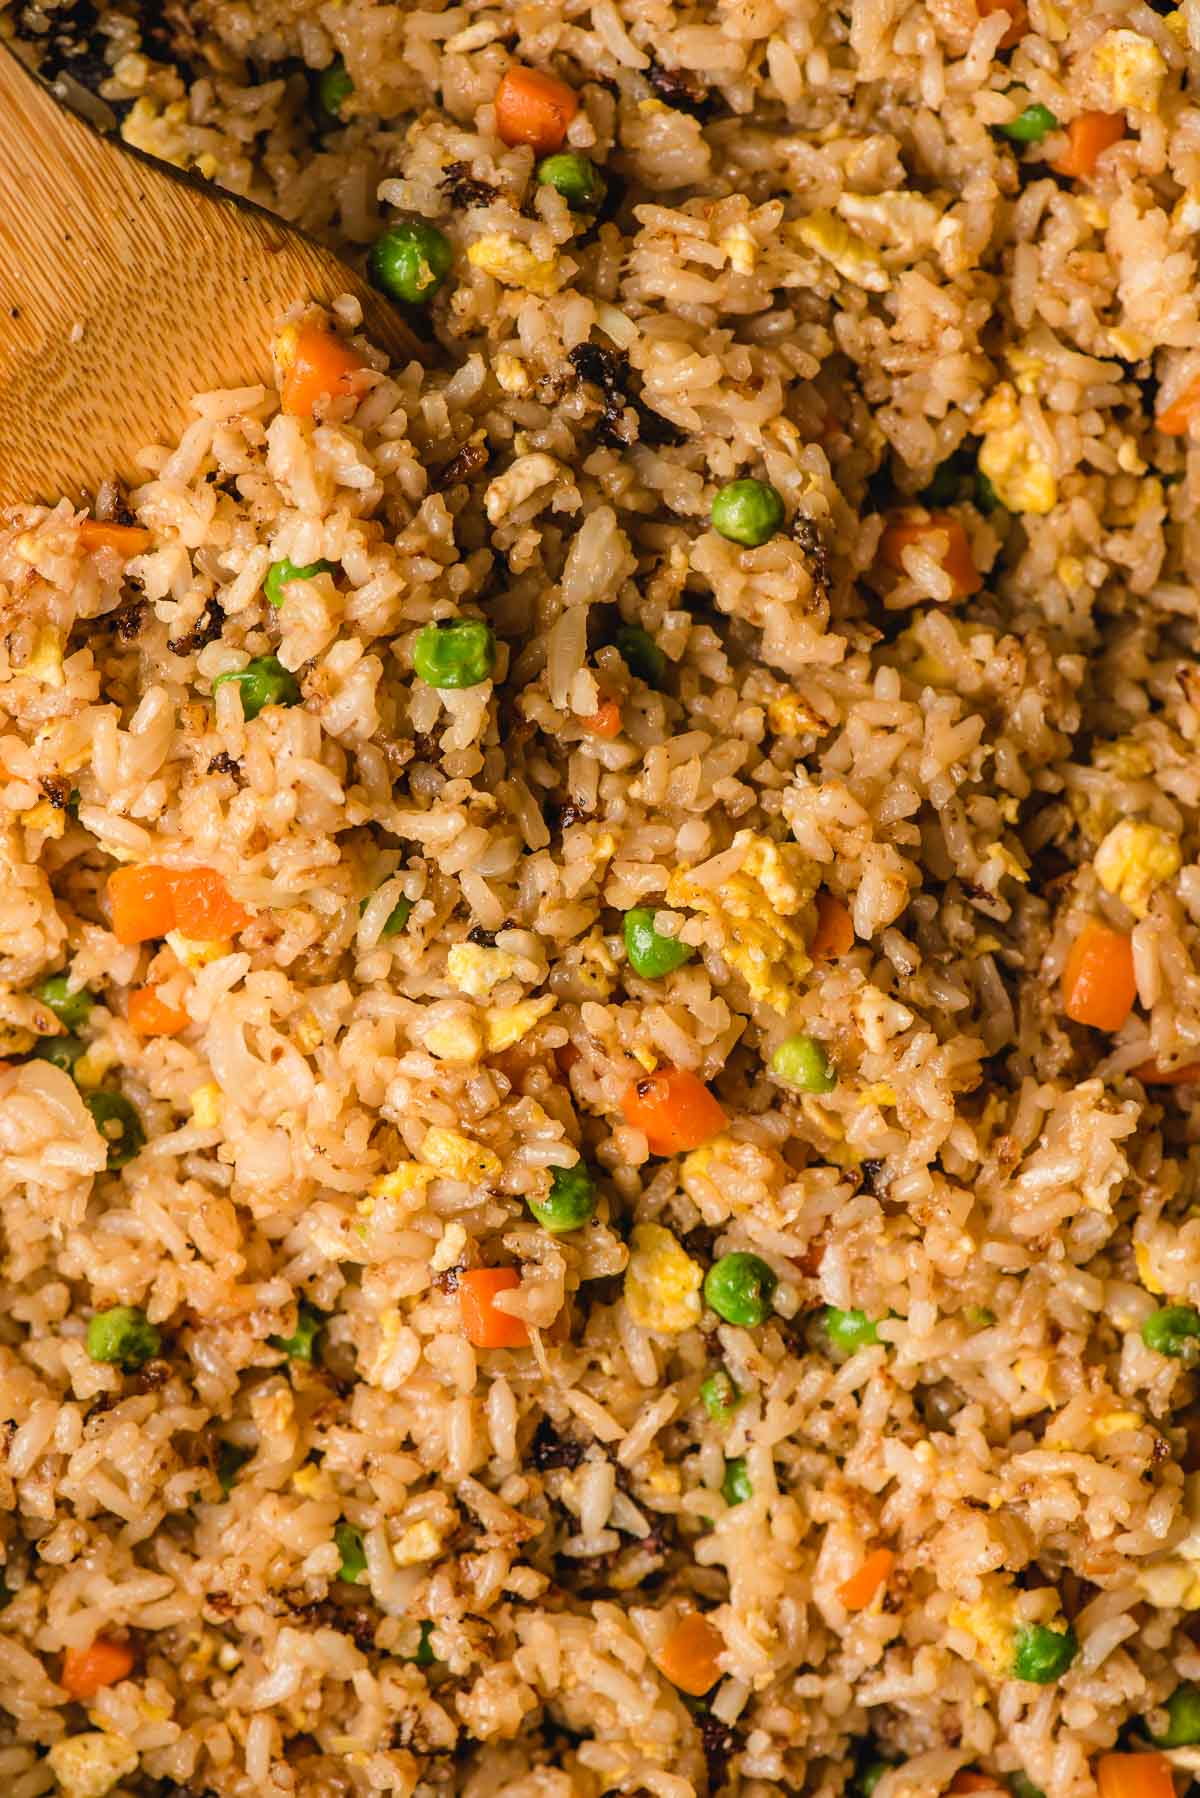 Close up image of hibachi fried rice with carrots and peas.